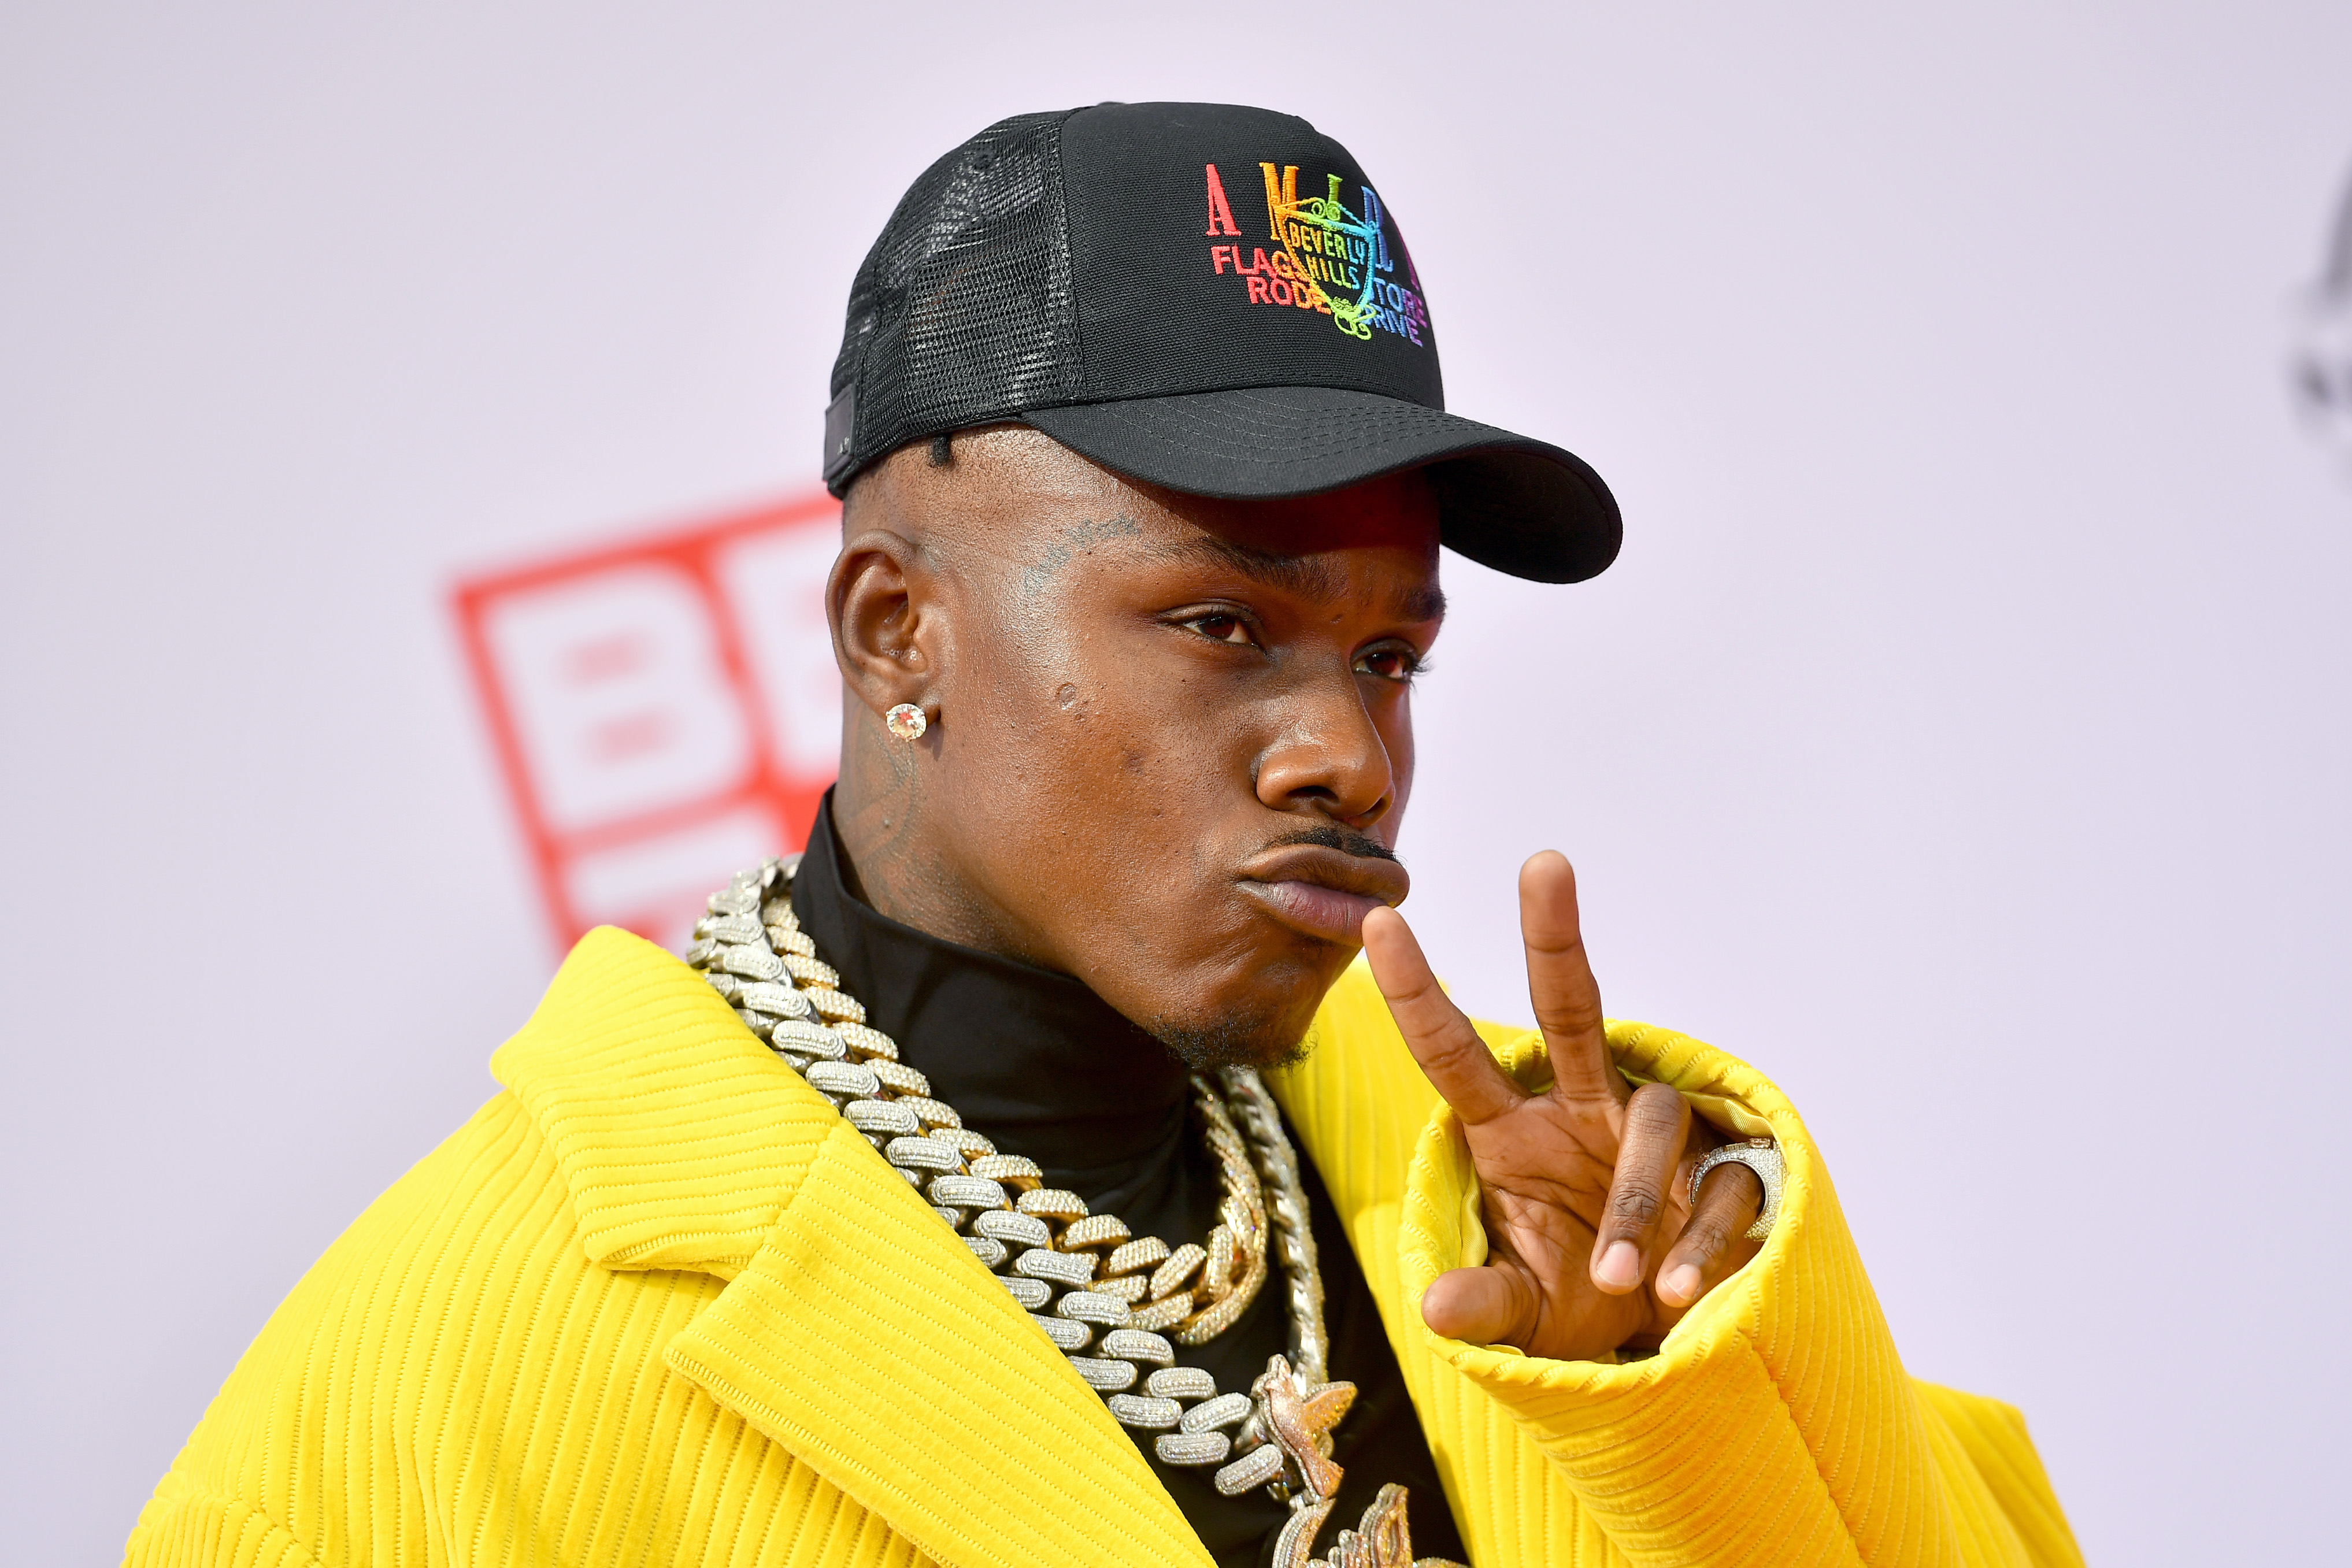 DaBaby Says “Don’t Fight Hate With Hate,” GLADD Calls His Comments “Harmful”